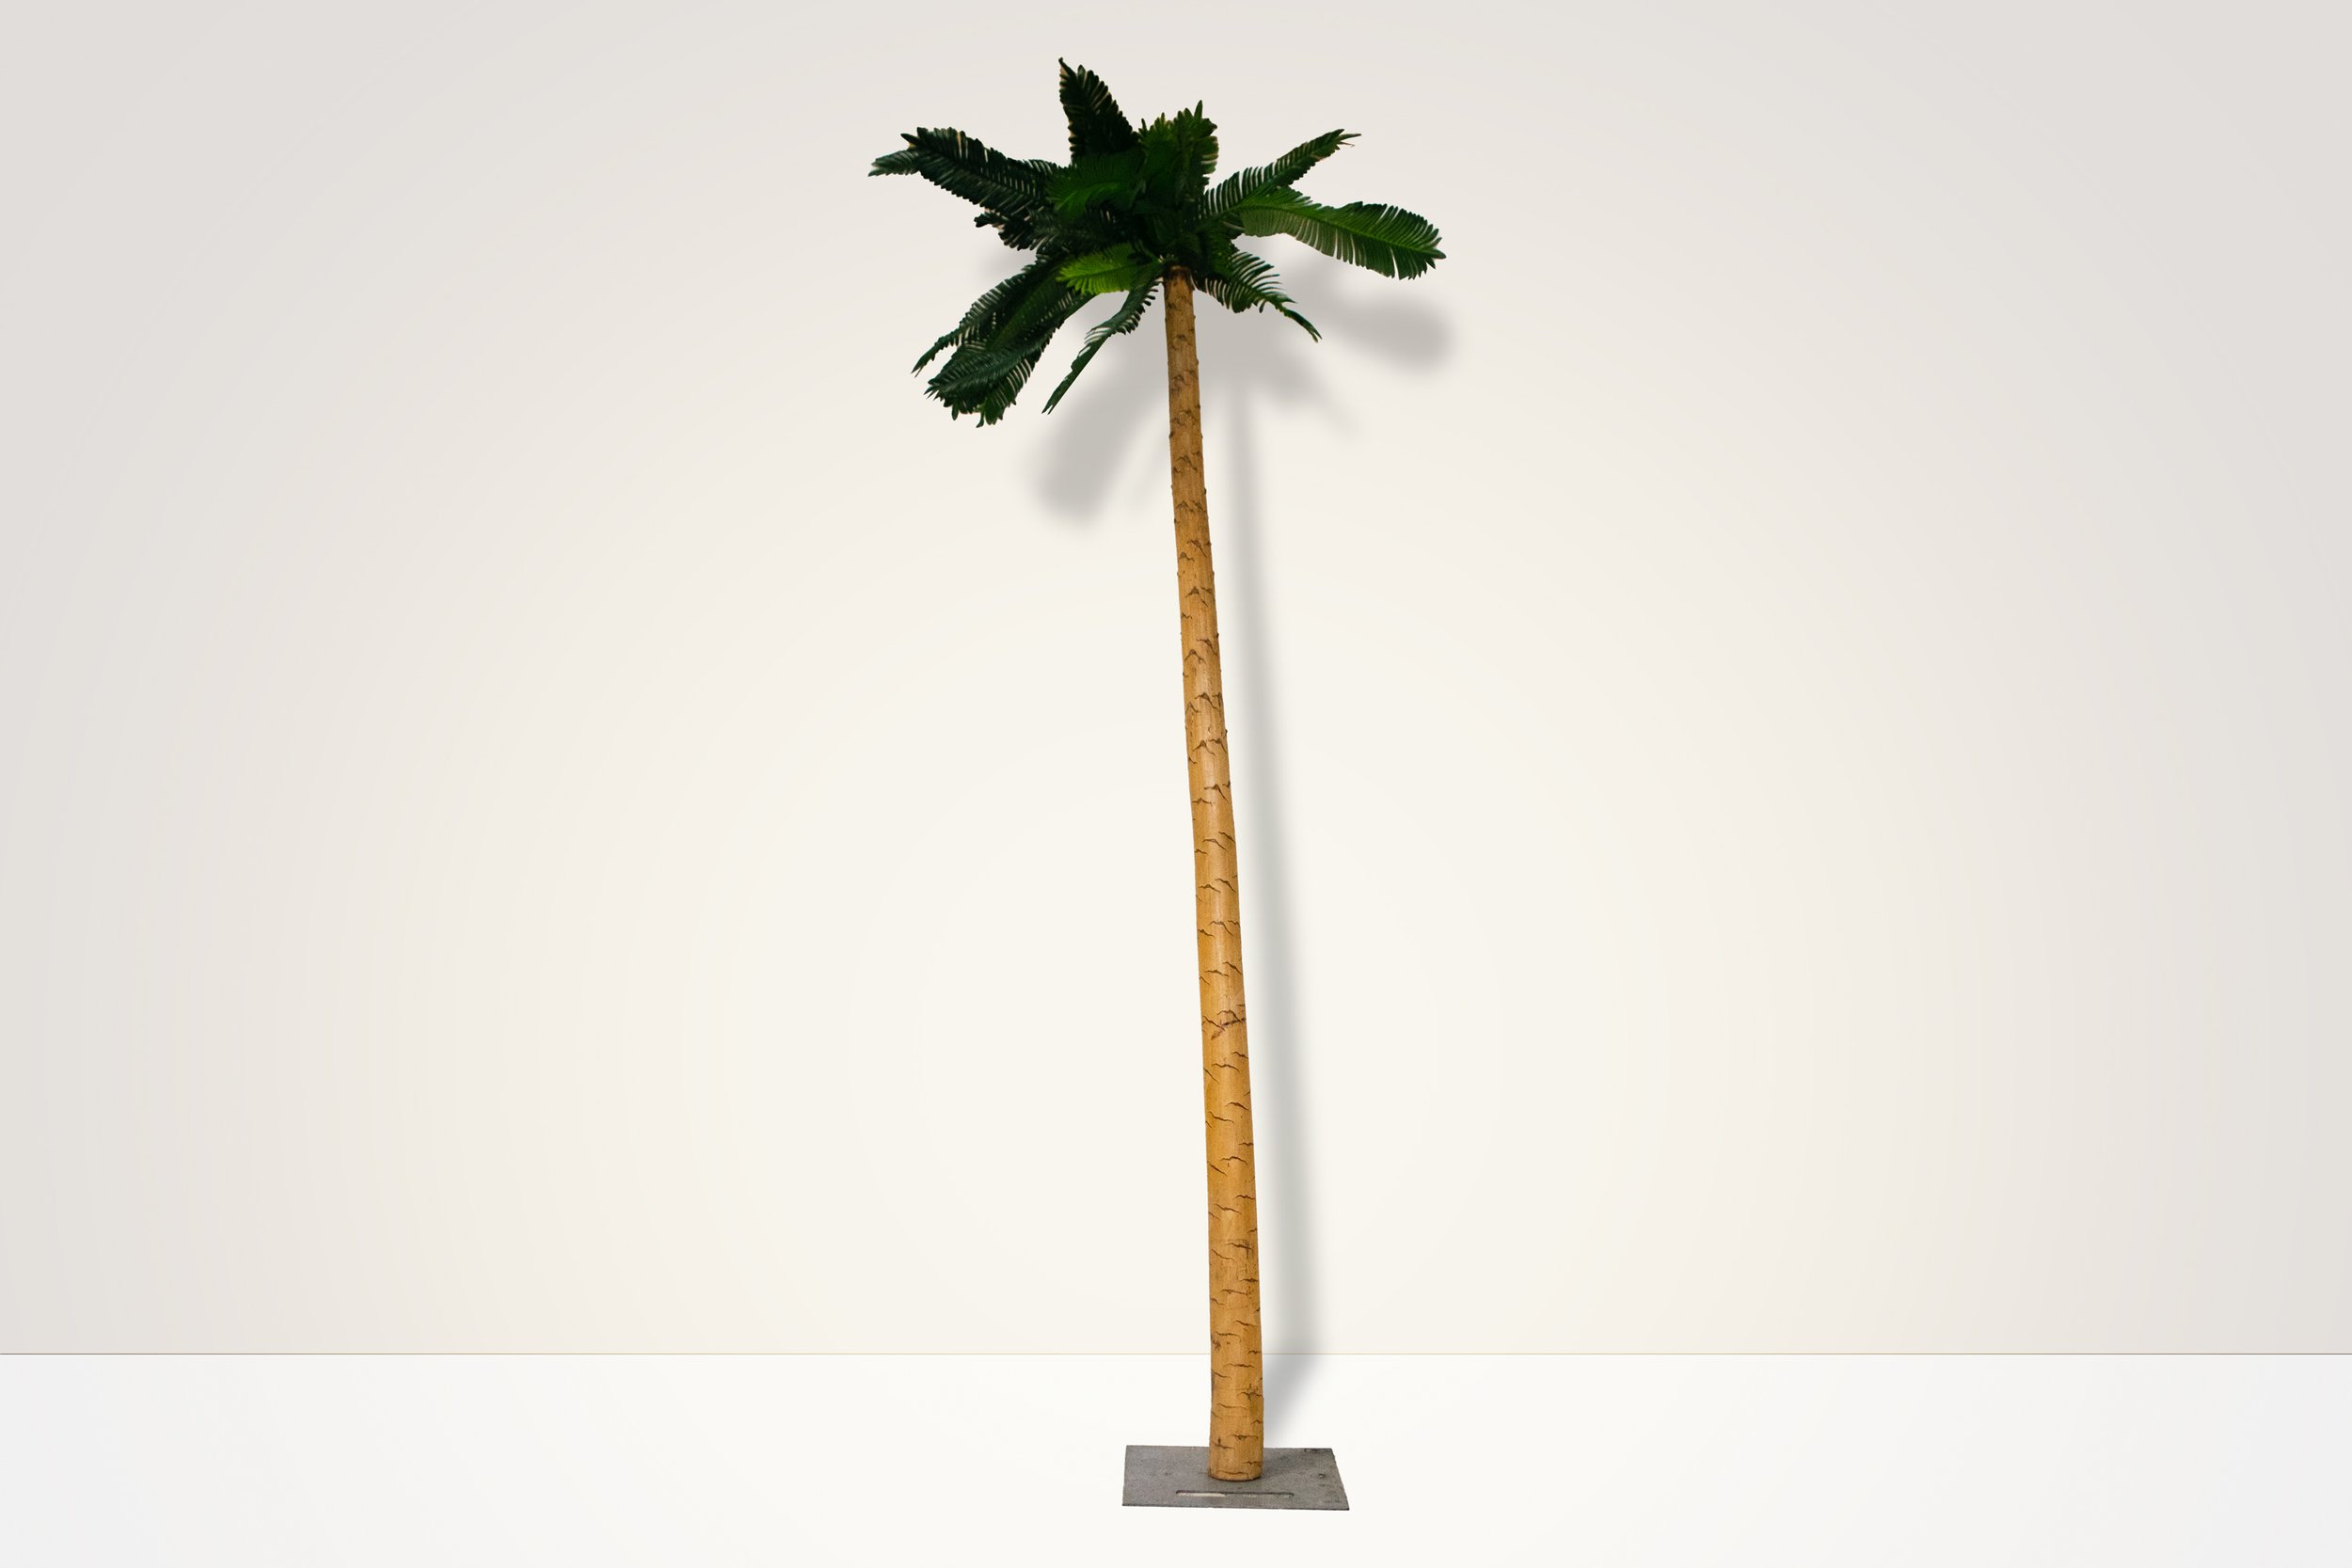 The 3D Palm Tree w/ Realistic Trunks